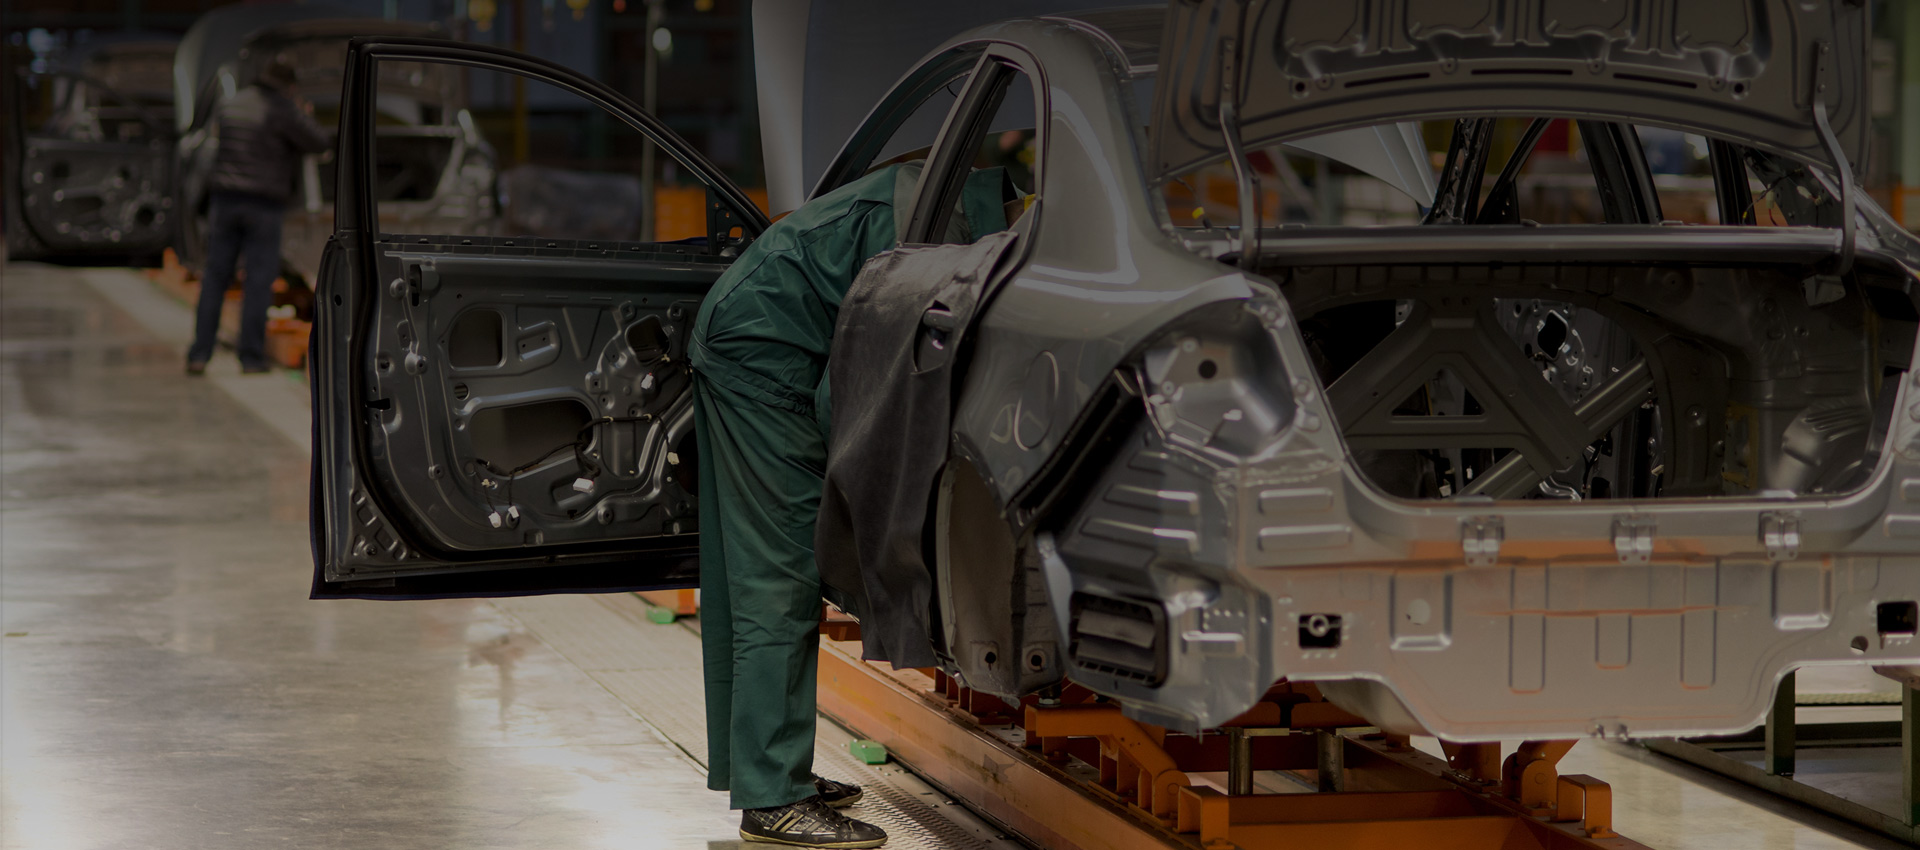 Photograph of the inside of a car manufacturing facility, with a worker working on the inside of the car